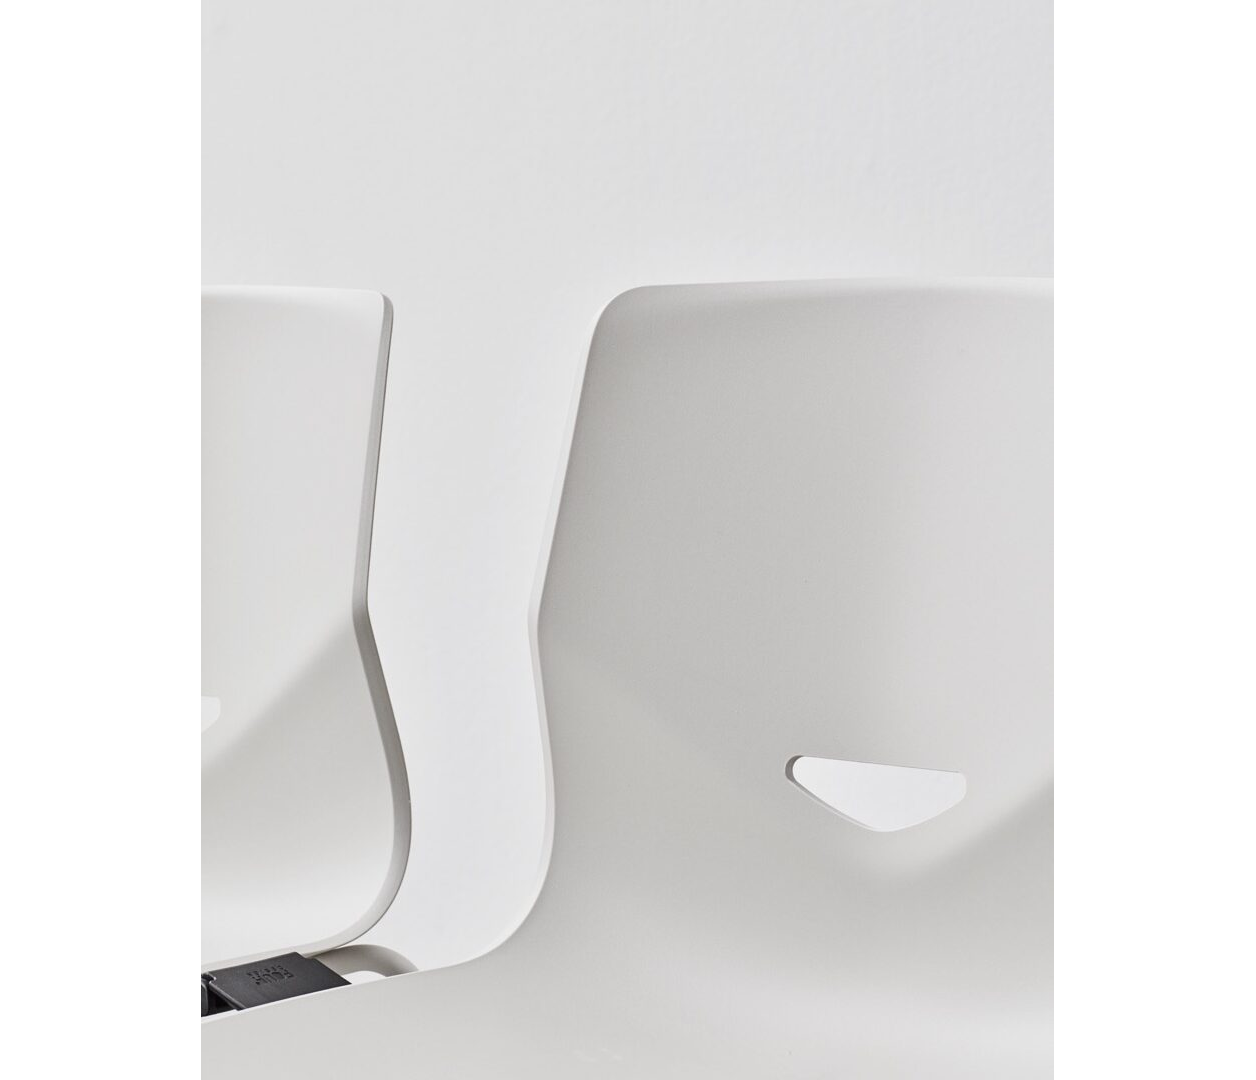 OCEE&FOUR – Chairs – FourSure 44 – Details Image 19 Large